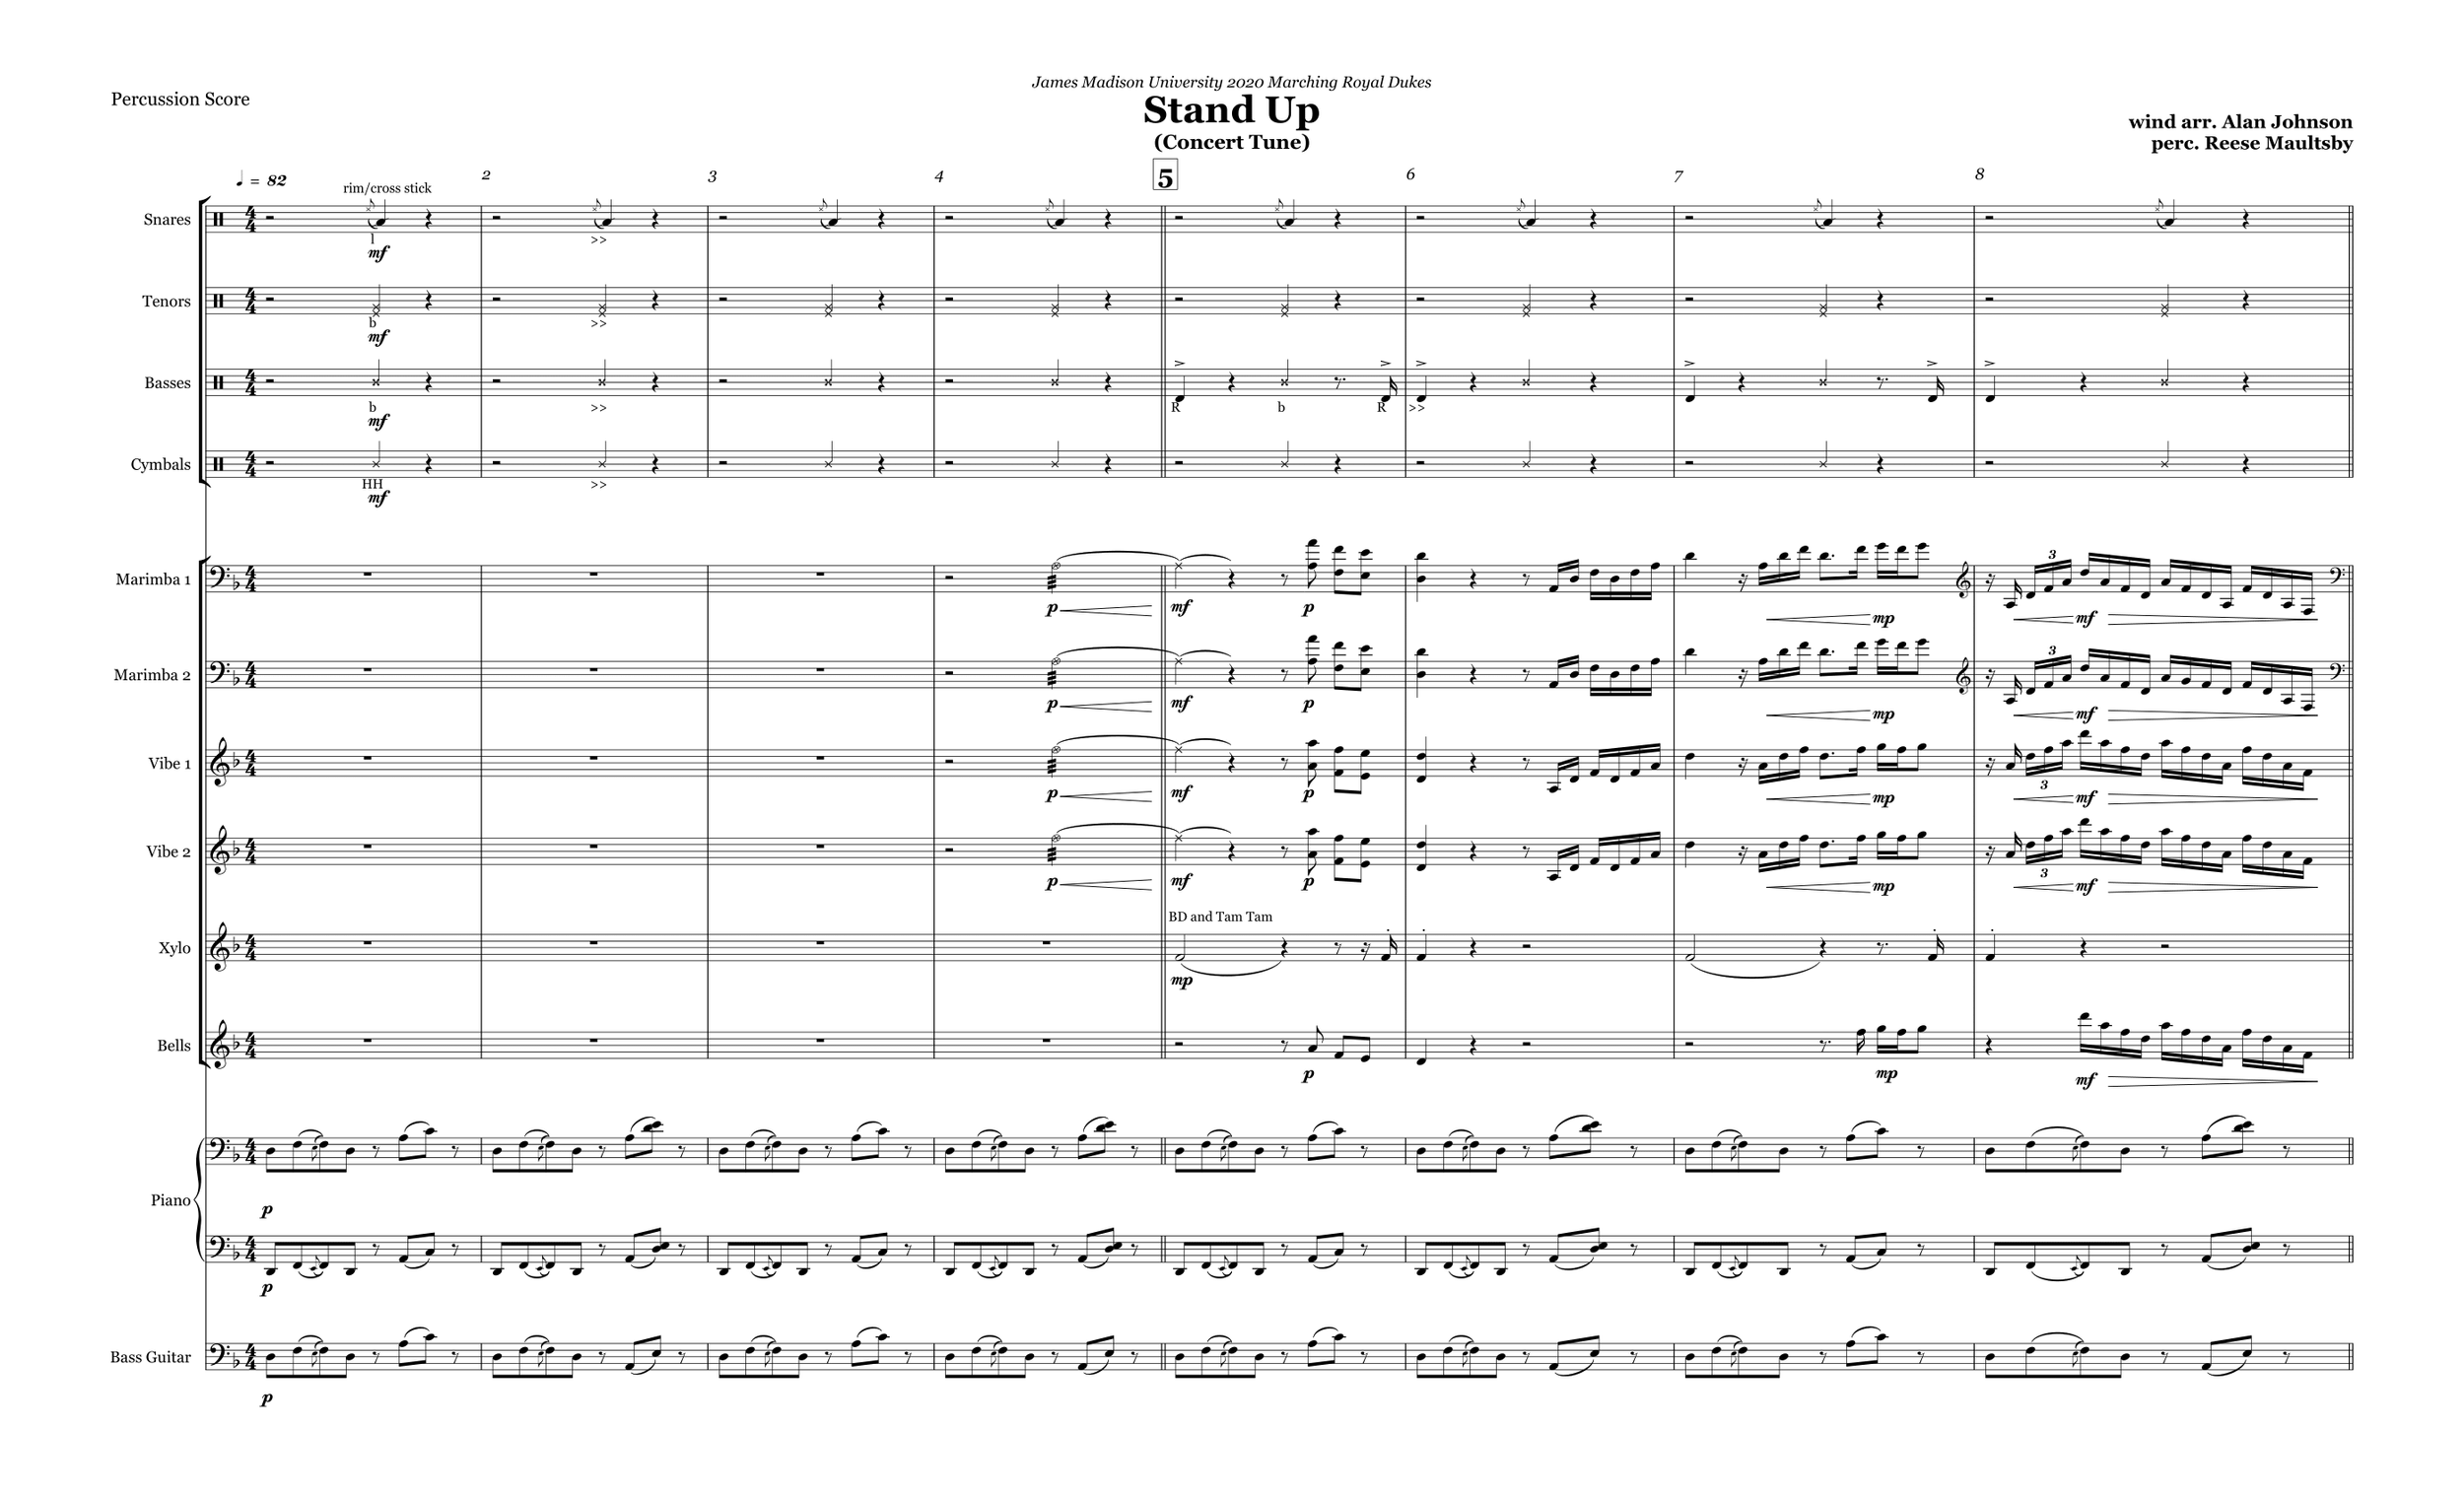 Stand Up Percussion Score Final - Full Score (legal for YT)-01.png